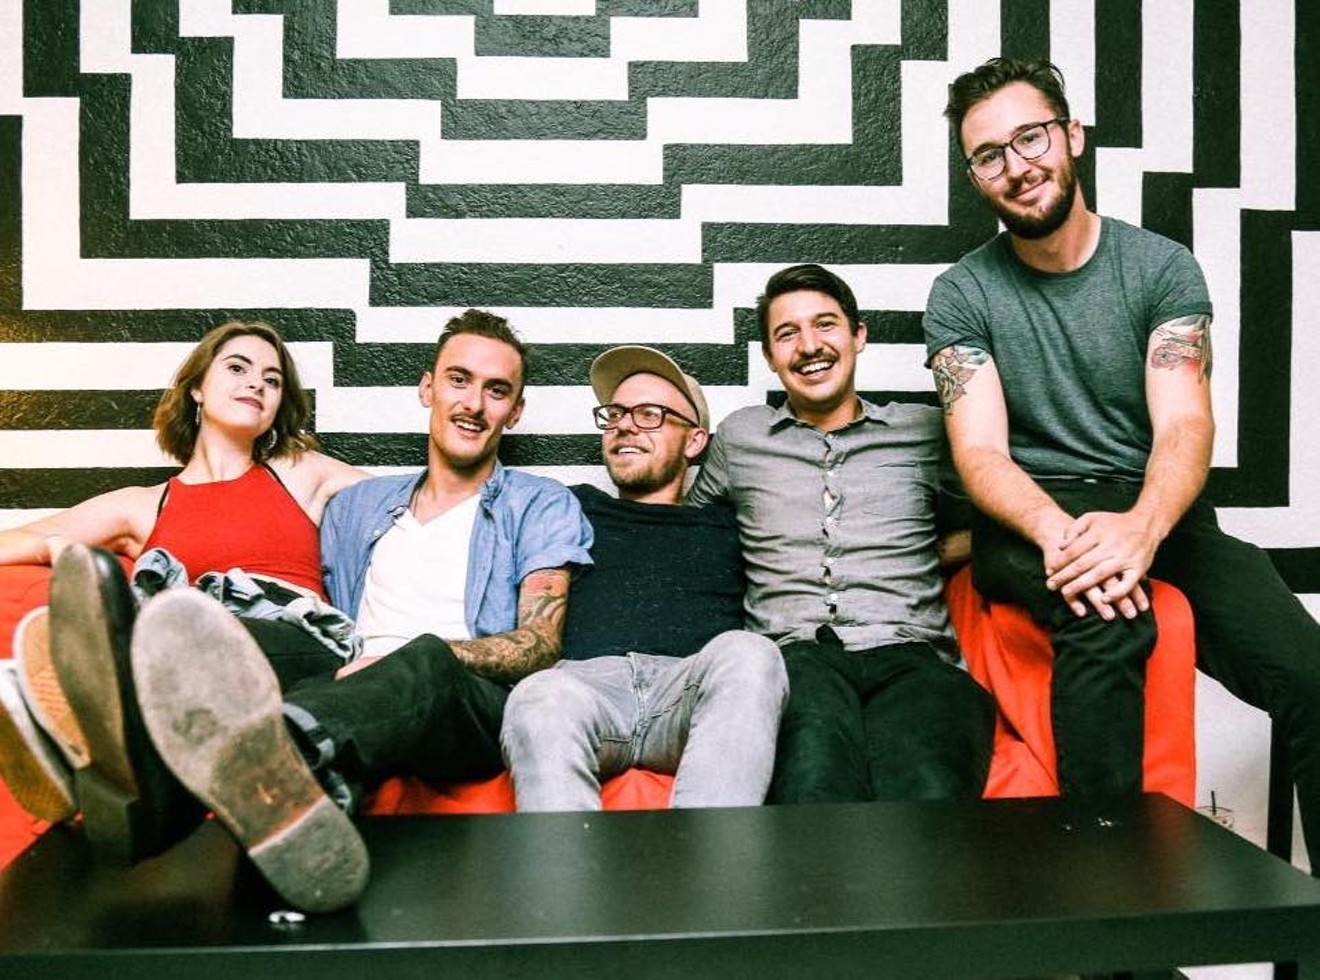 Denver indie-rock five-piece Silver & Gold is releasing a new EP this month.